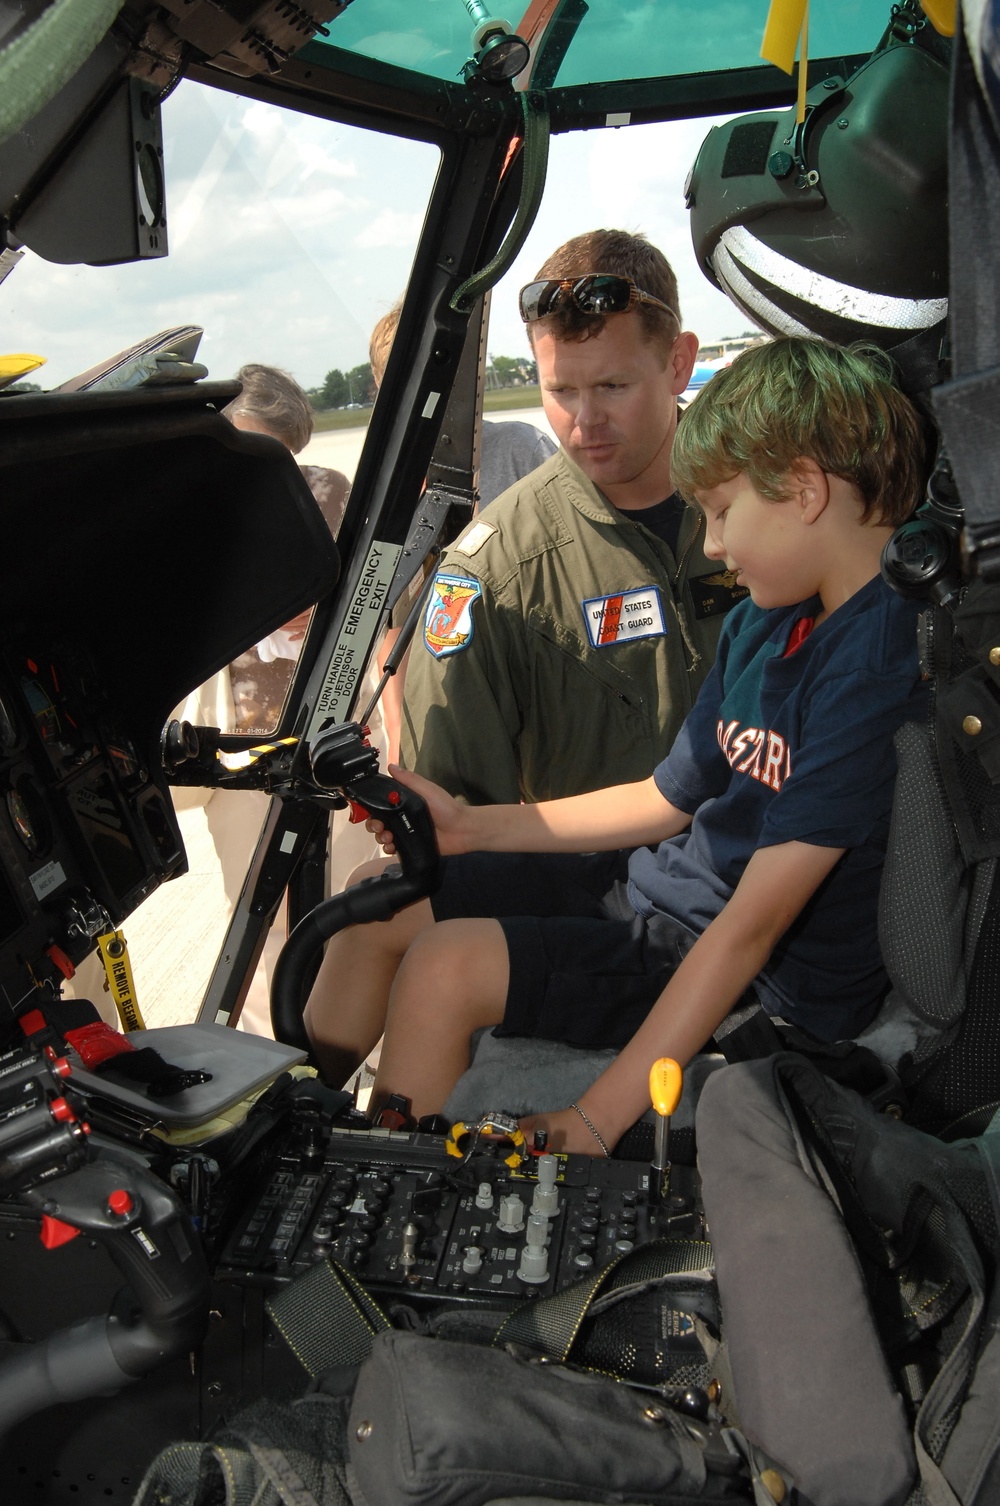 Coast Guard Air Station Traverse City crew reunites with rescued boy from Illinois